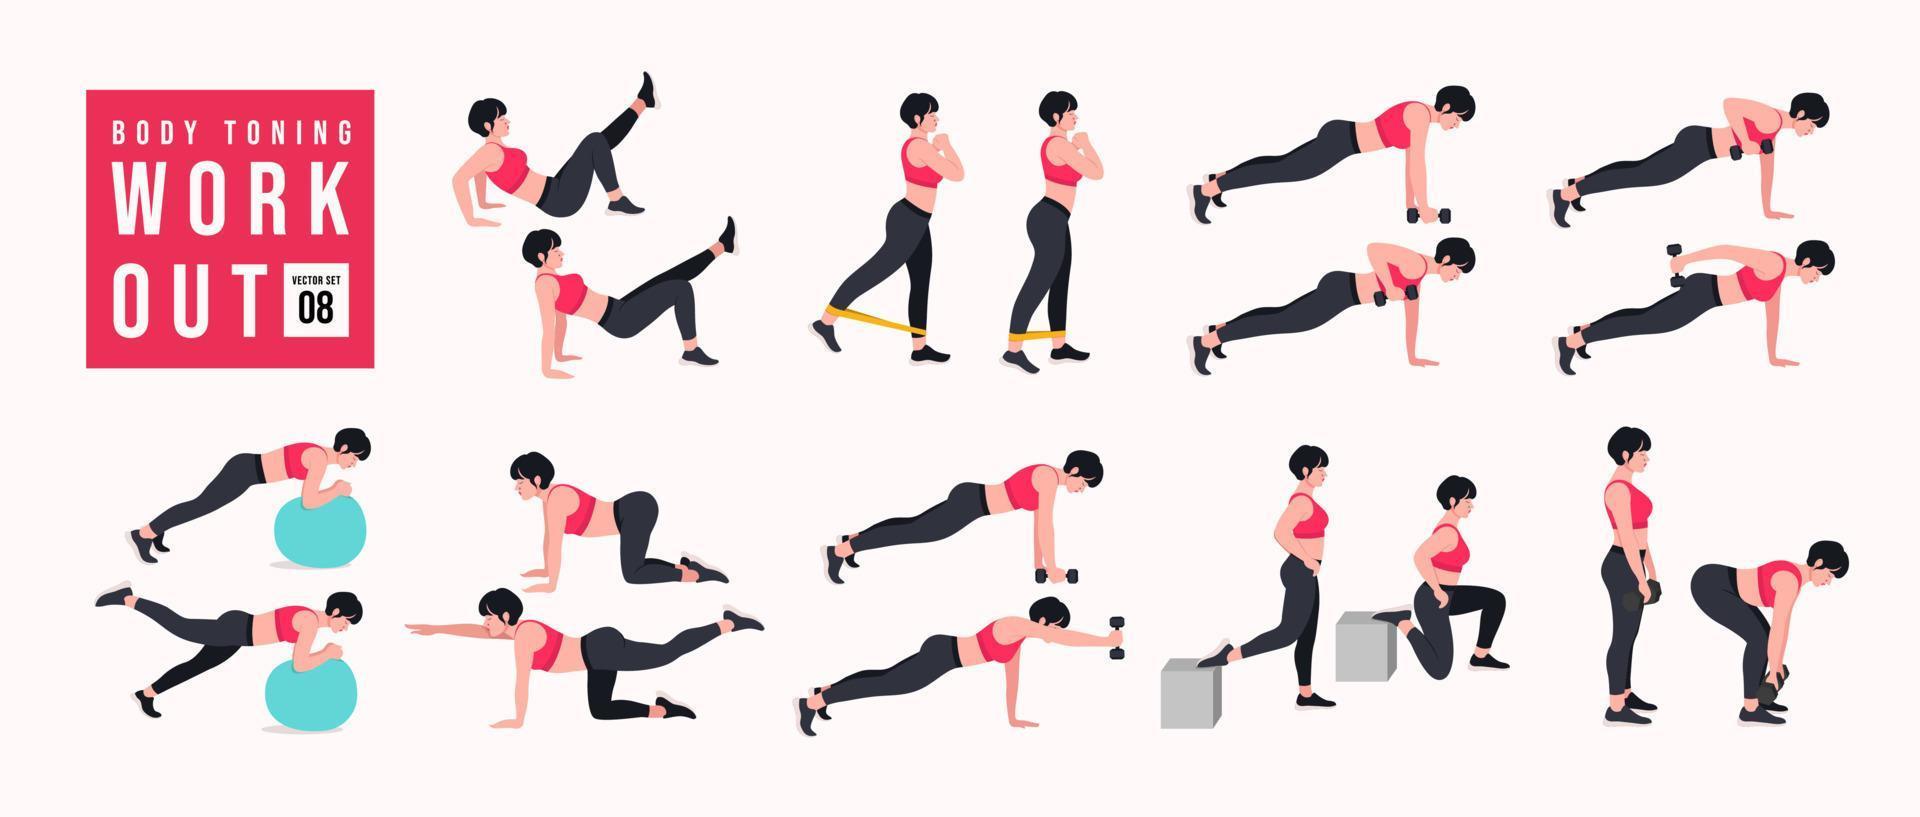 Body Toning Workout Set. Women doing fitness and yoga exercises. Lunges, Pushups, Squats, Dumbbell rows, Burpees, Side planks, Situps, Glute bridge, Leg Raise, Russian Twist, Side Crunch .etc vector